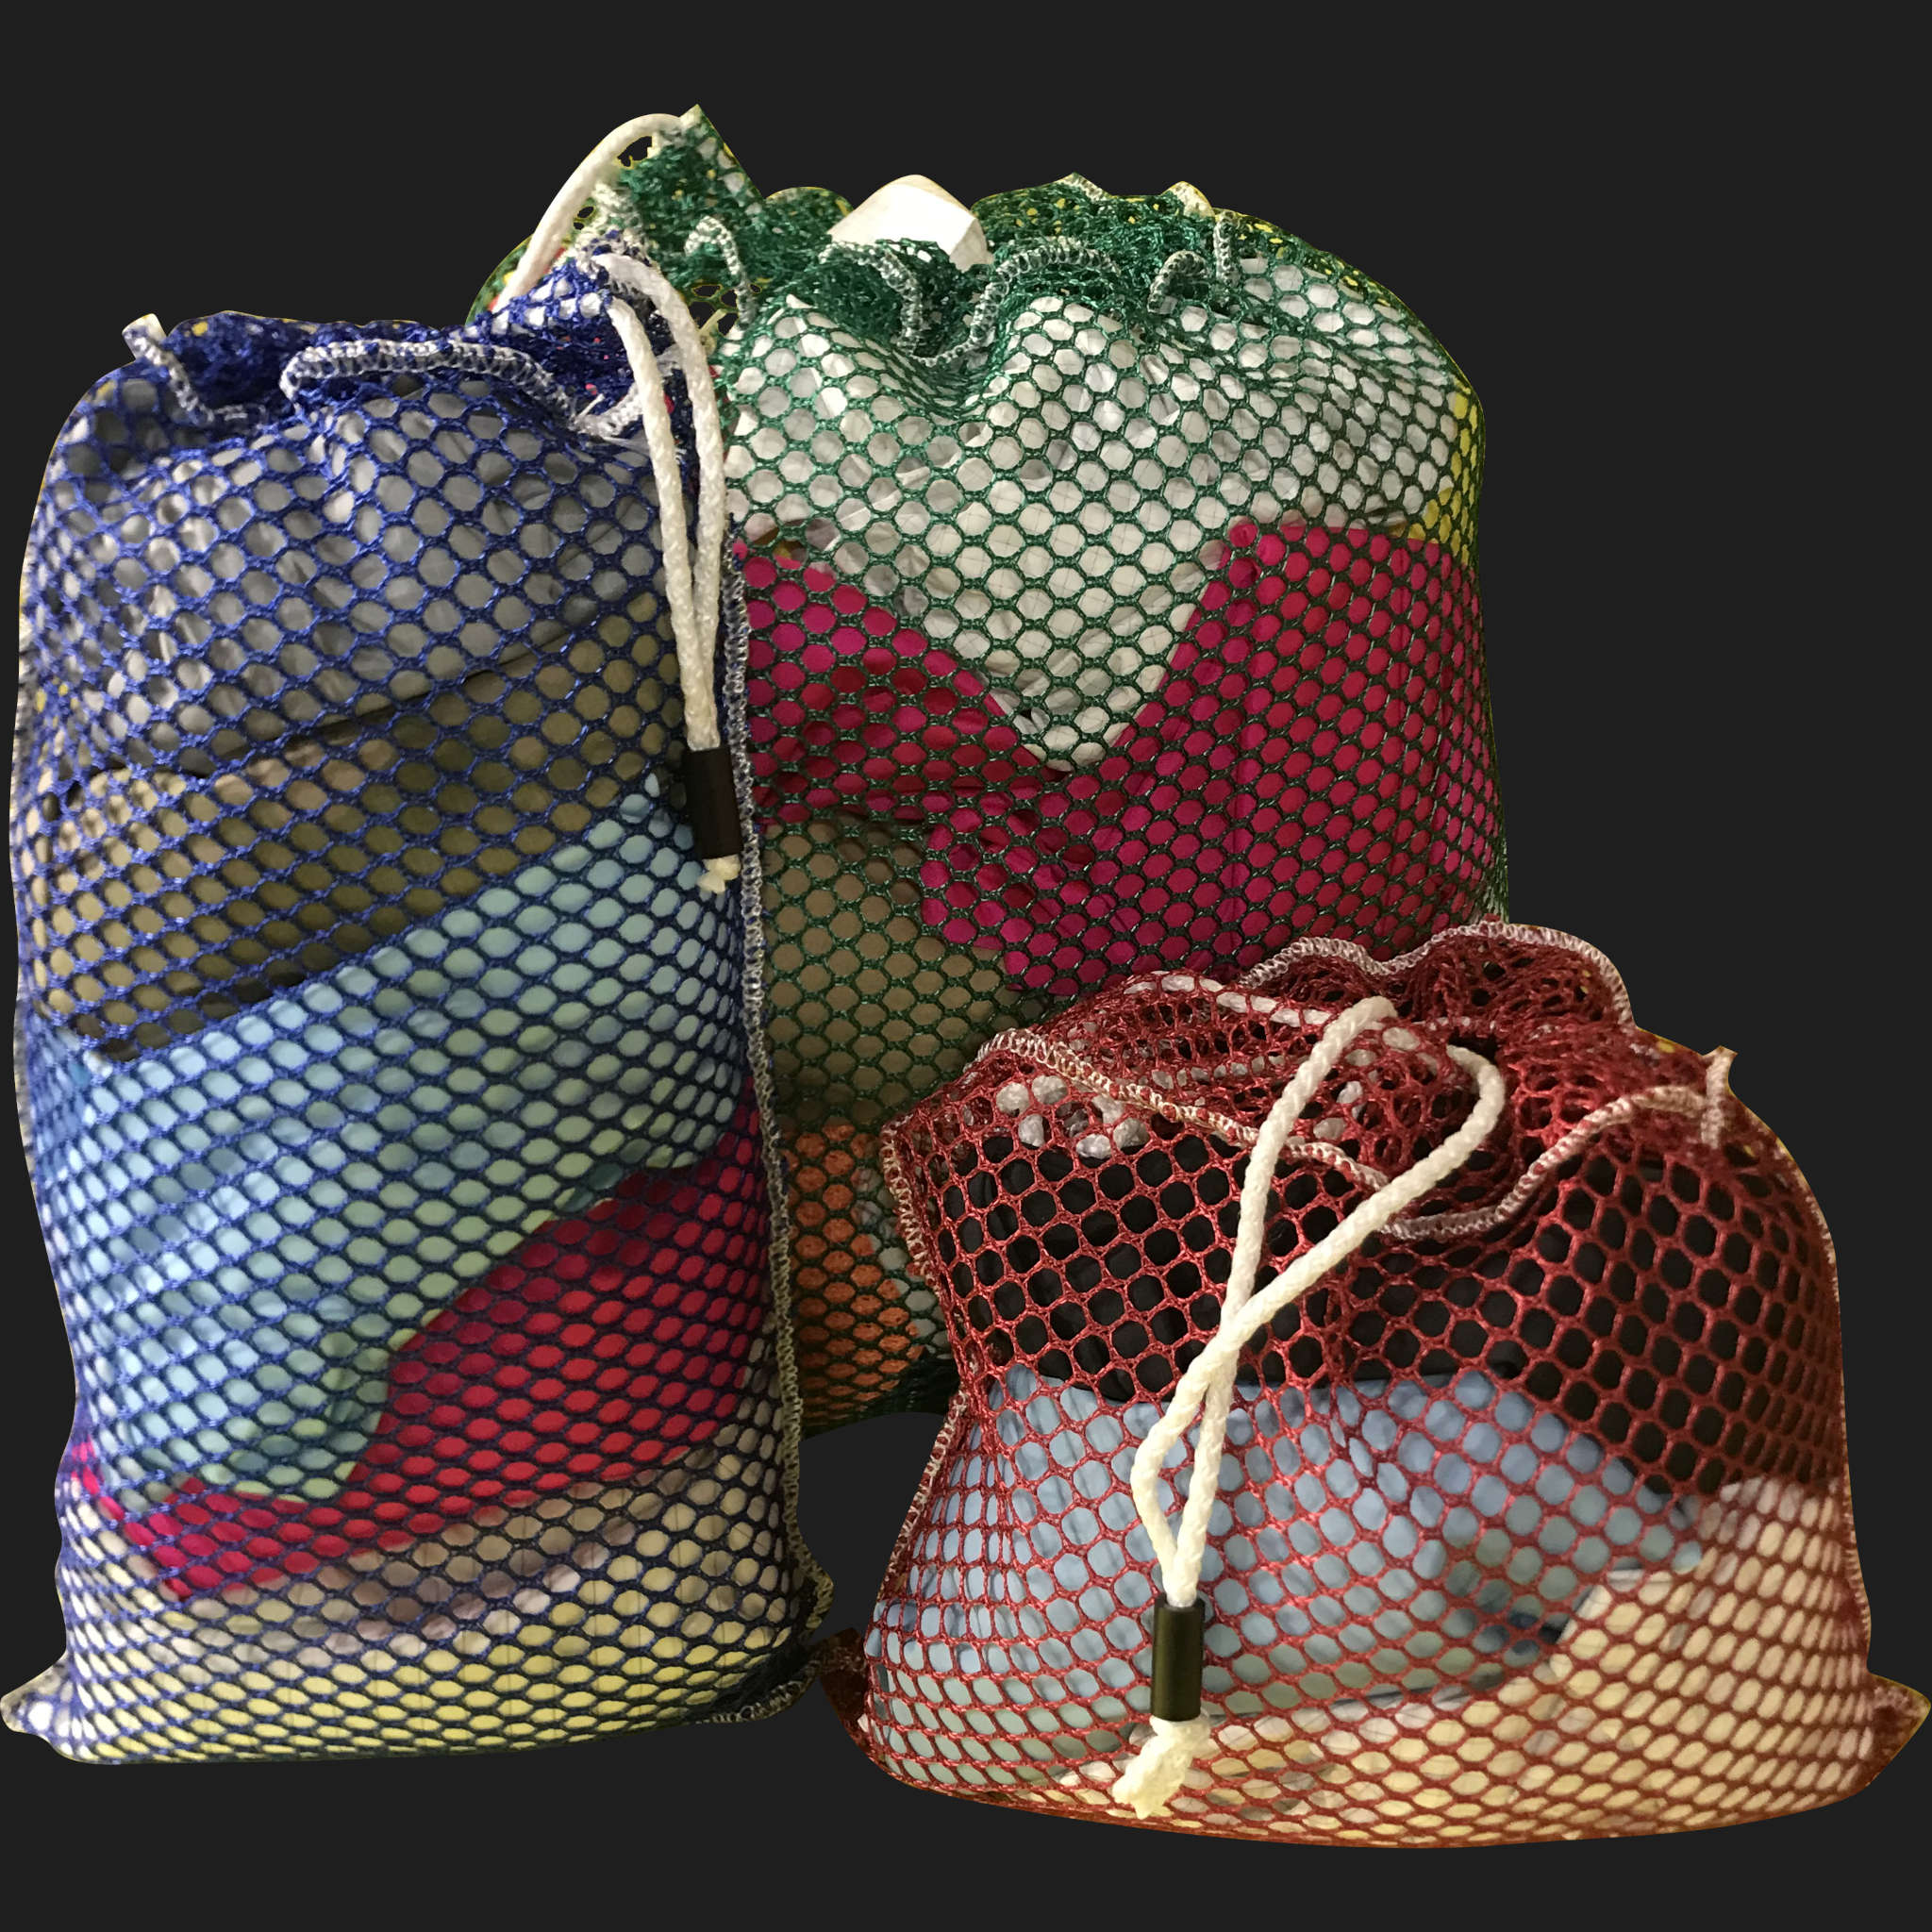 48" x 68" Customized Mesh-Net-Laundry Bags Heavy Duty with Cord and barrellock closure